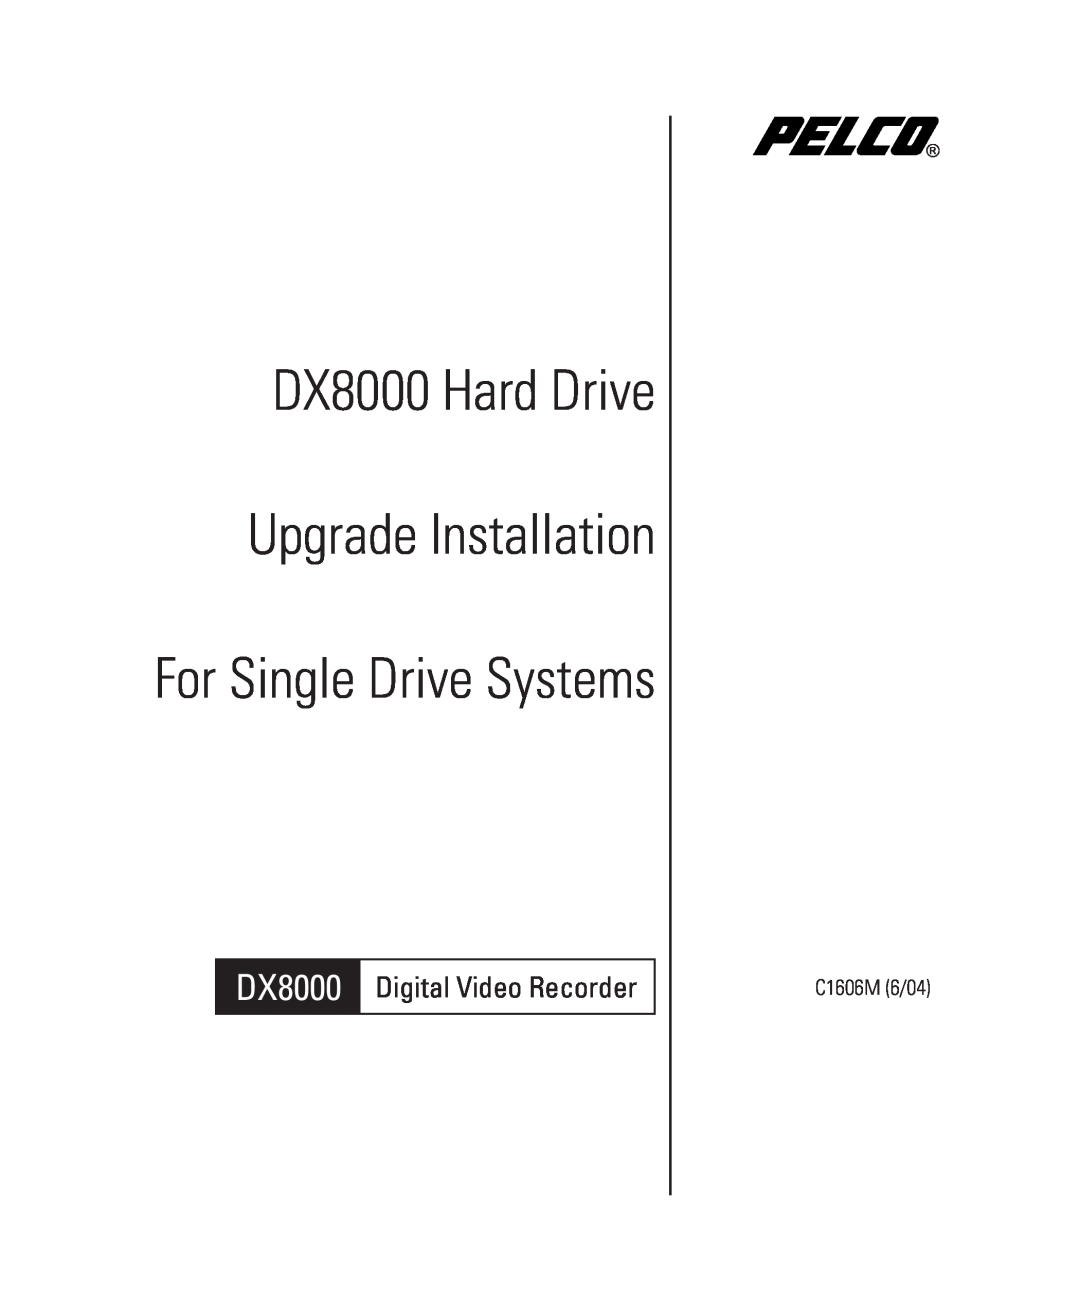 Pelco Dx8000 manual DX8000 Hard Drive Upgrade Installation, For Single Drive Systems, Digital Video Recorder 